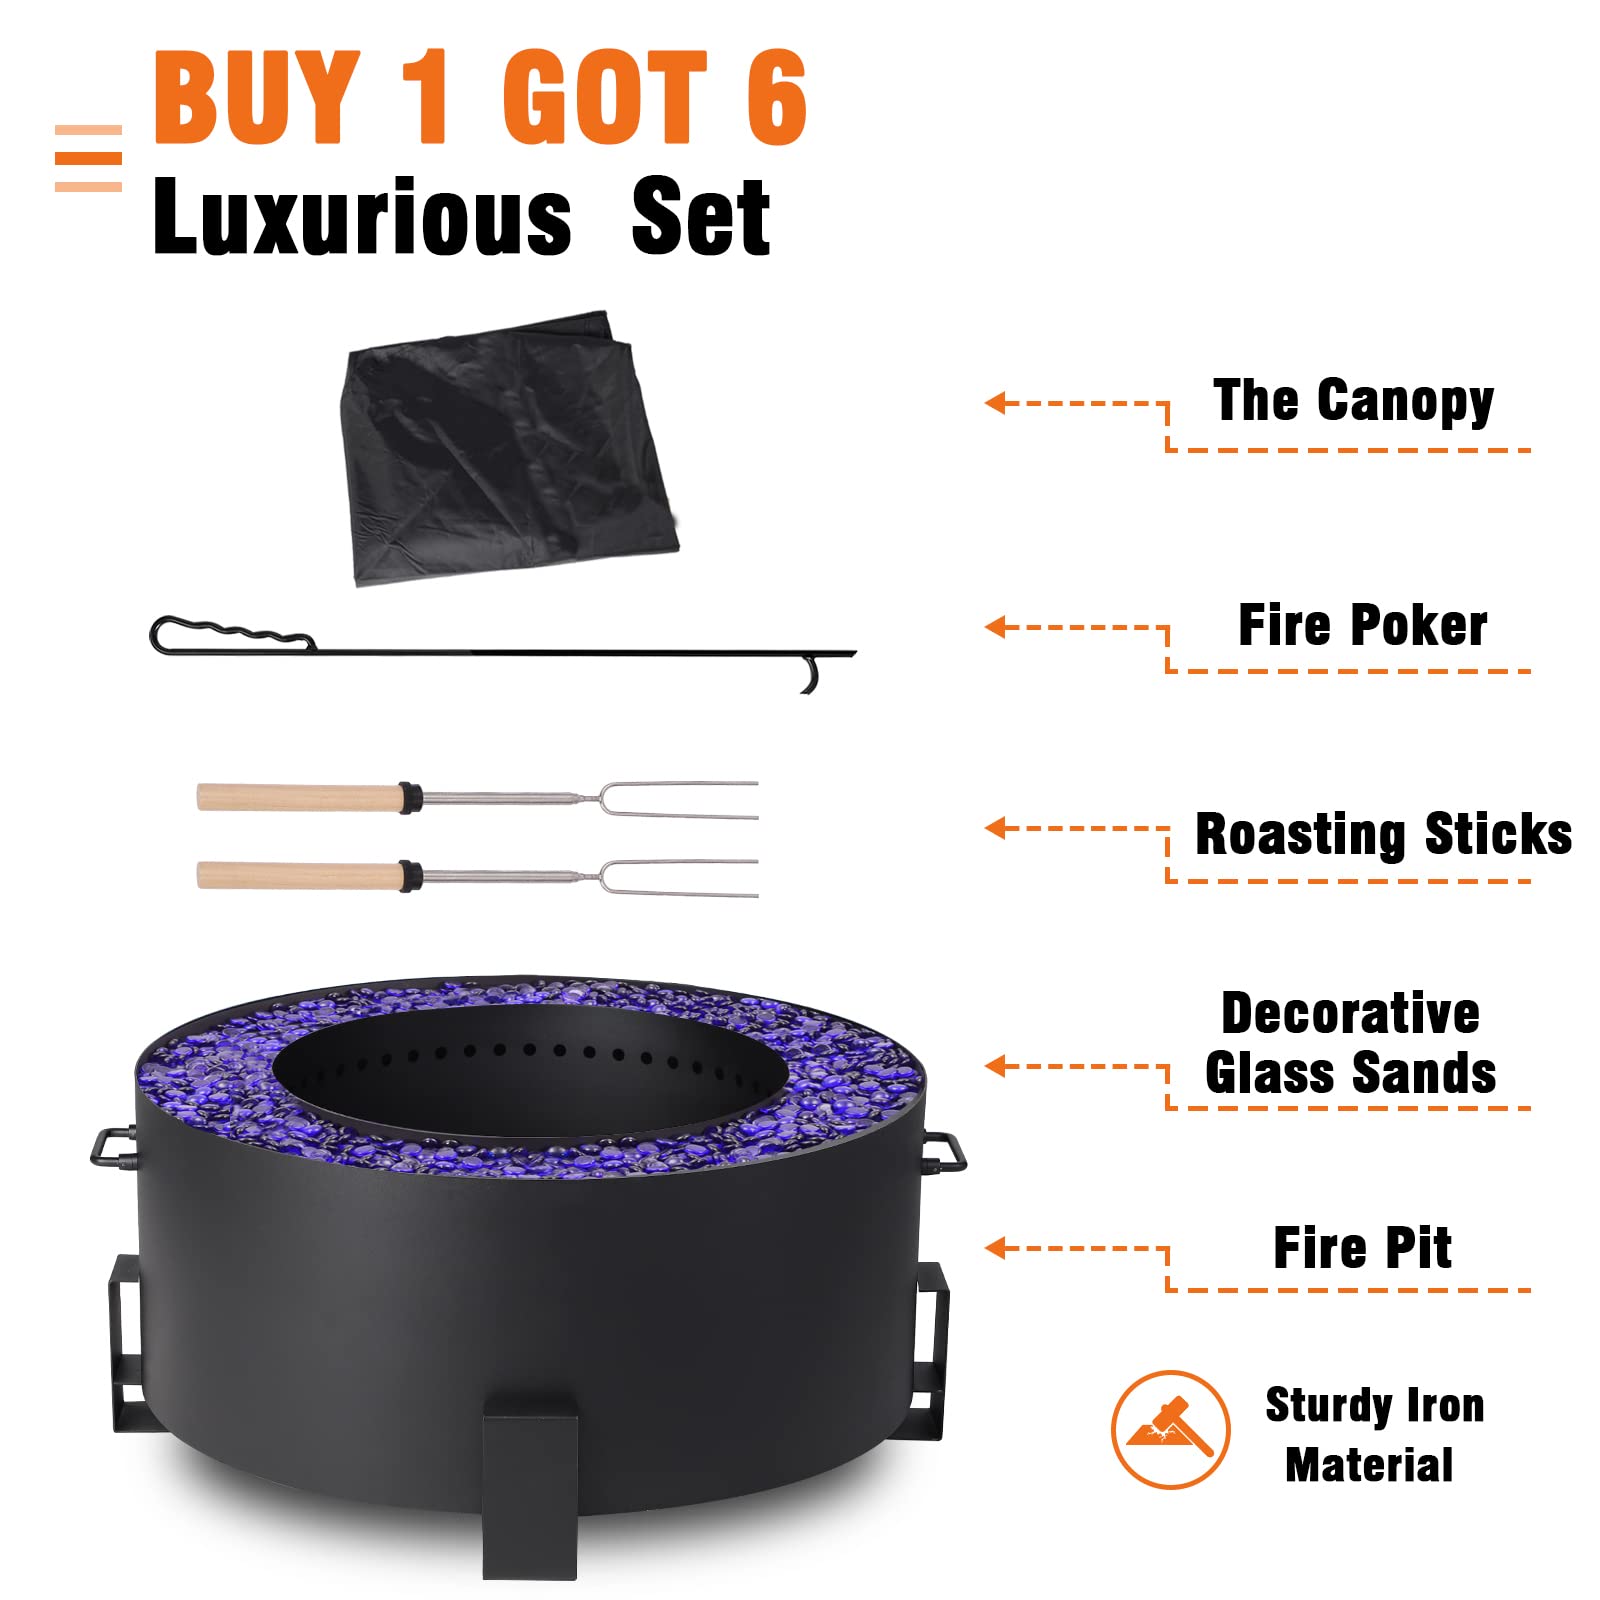 MAGIC UNION Smokeless Fire Pit for Outside, 27 Inch Diameter Fire Pits Wood Burning for Camping Stove Portable, Iron Bonfire Fire Pit with Fire Poker and Waterproof Cover for Patio Backyard Black